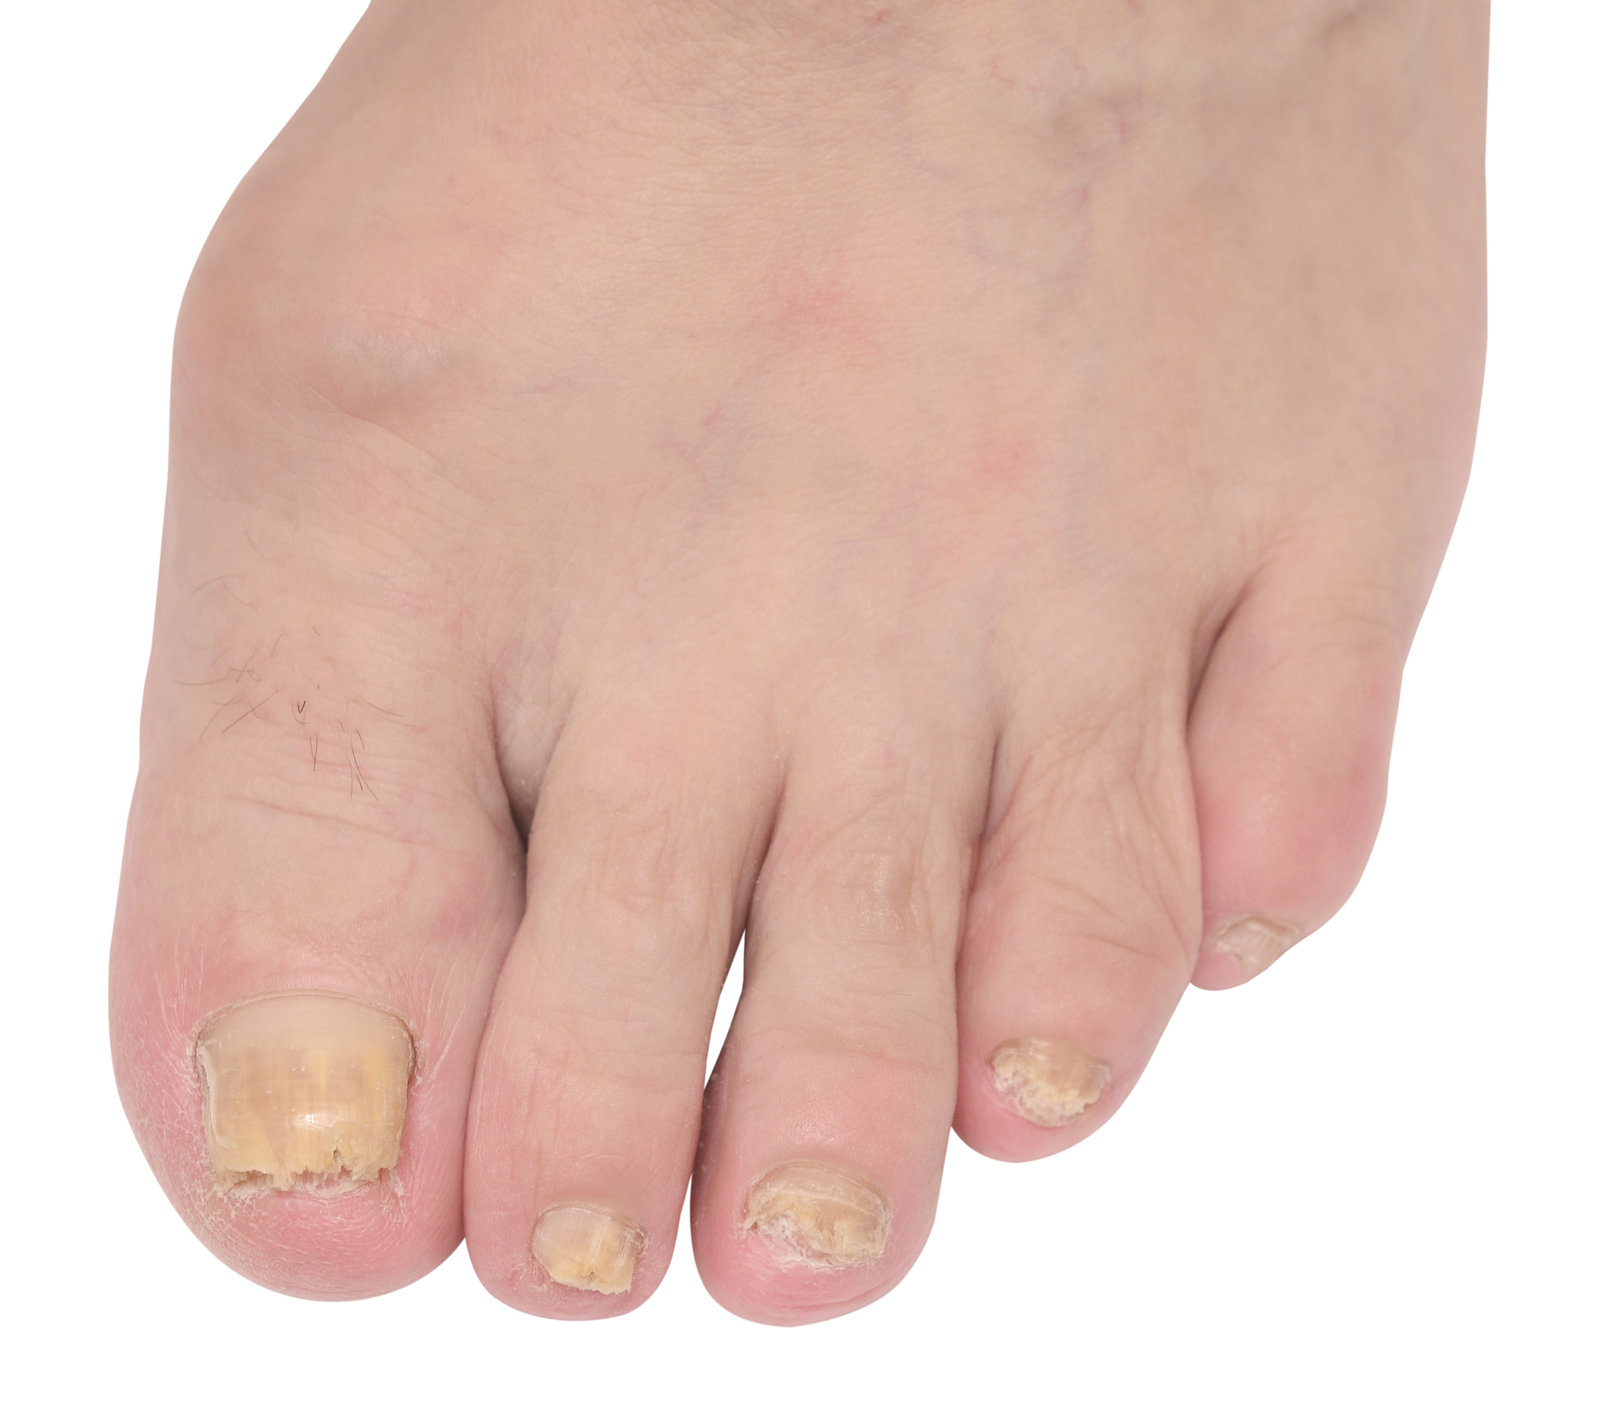 Podiatry Foot Care Blog | Professional Foot Care Tips and Advice